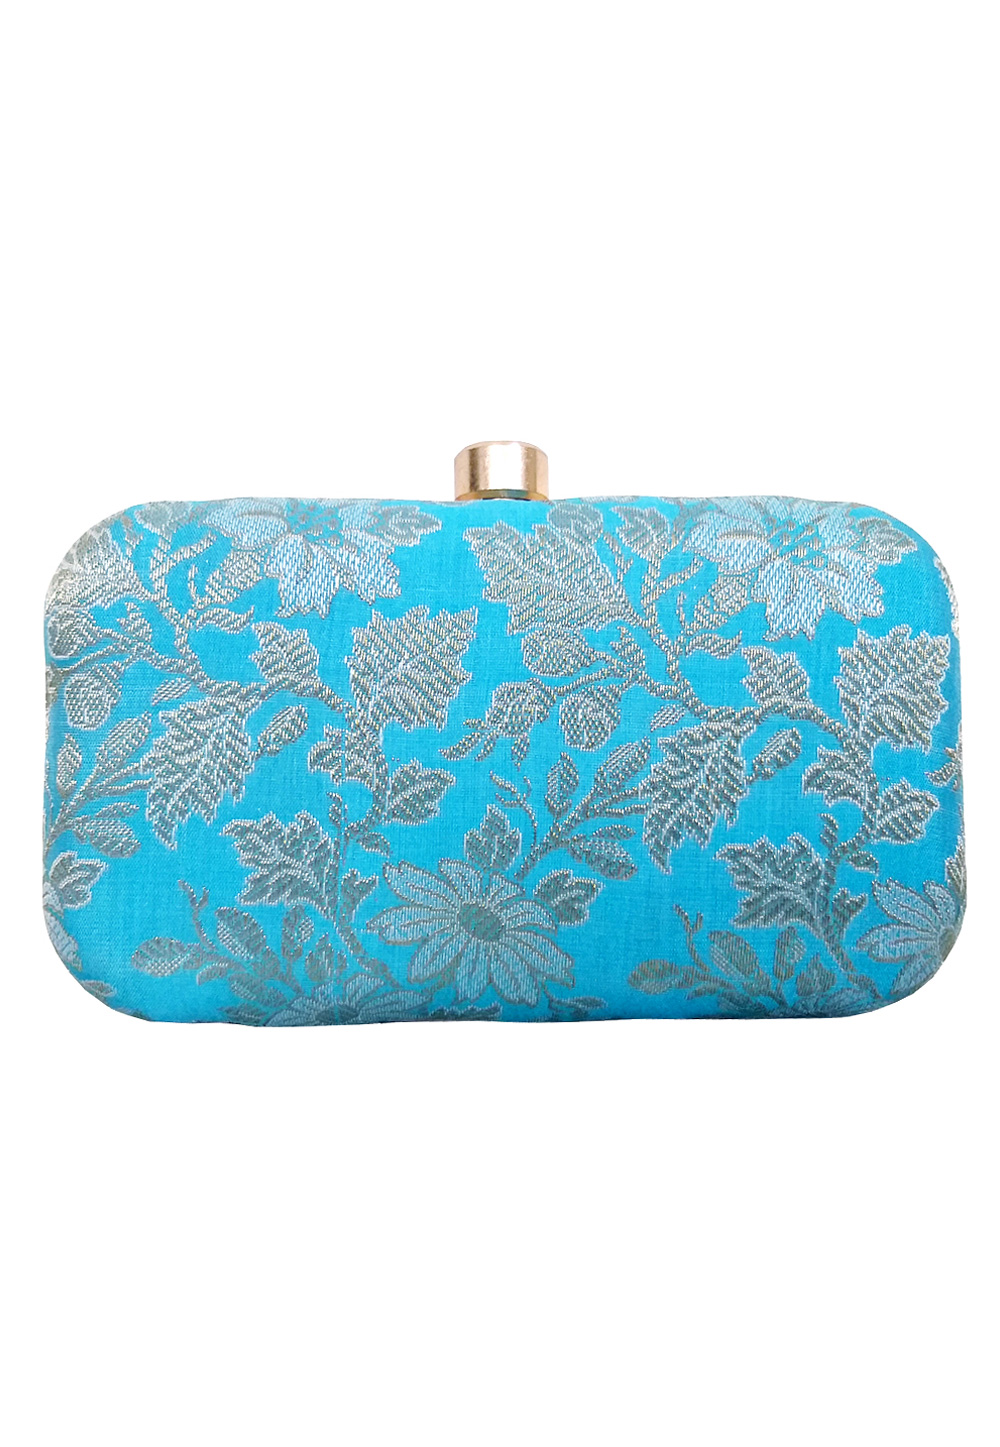 Aqua Synthetic Embroidered Clutch 172608